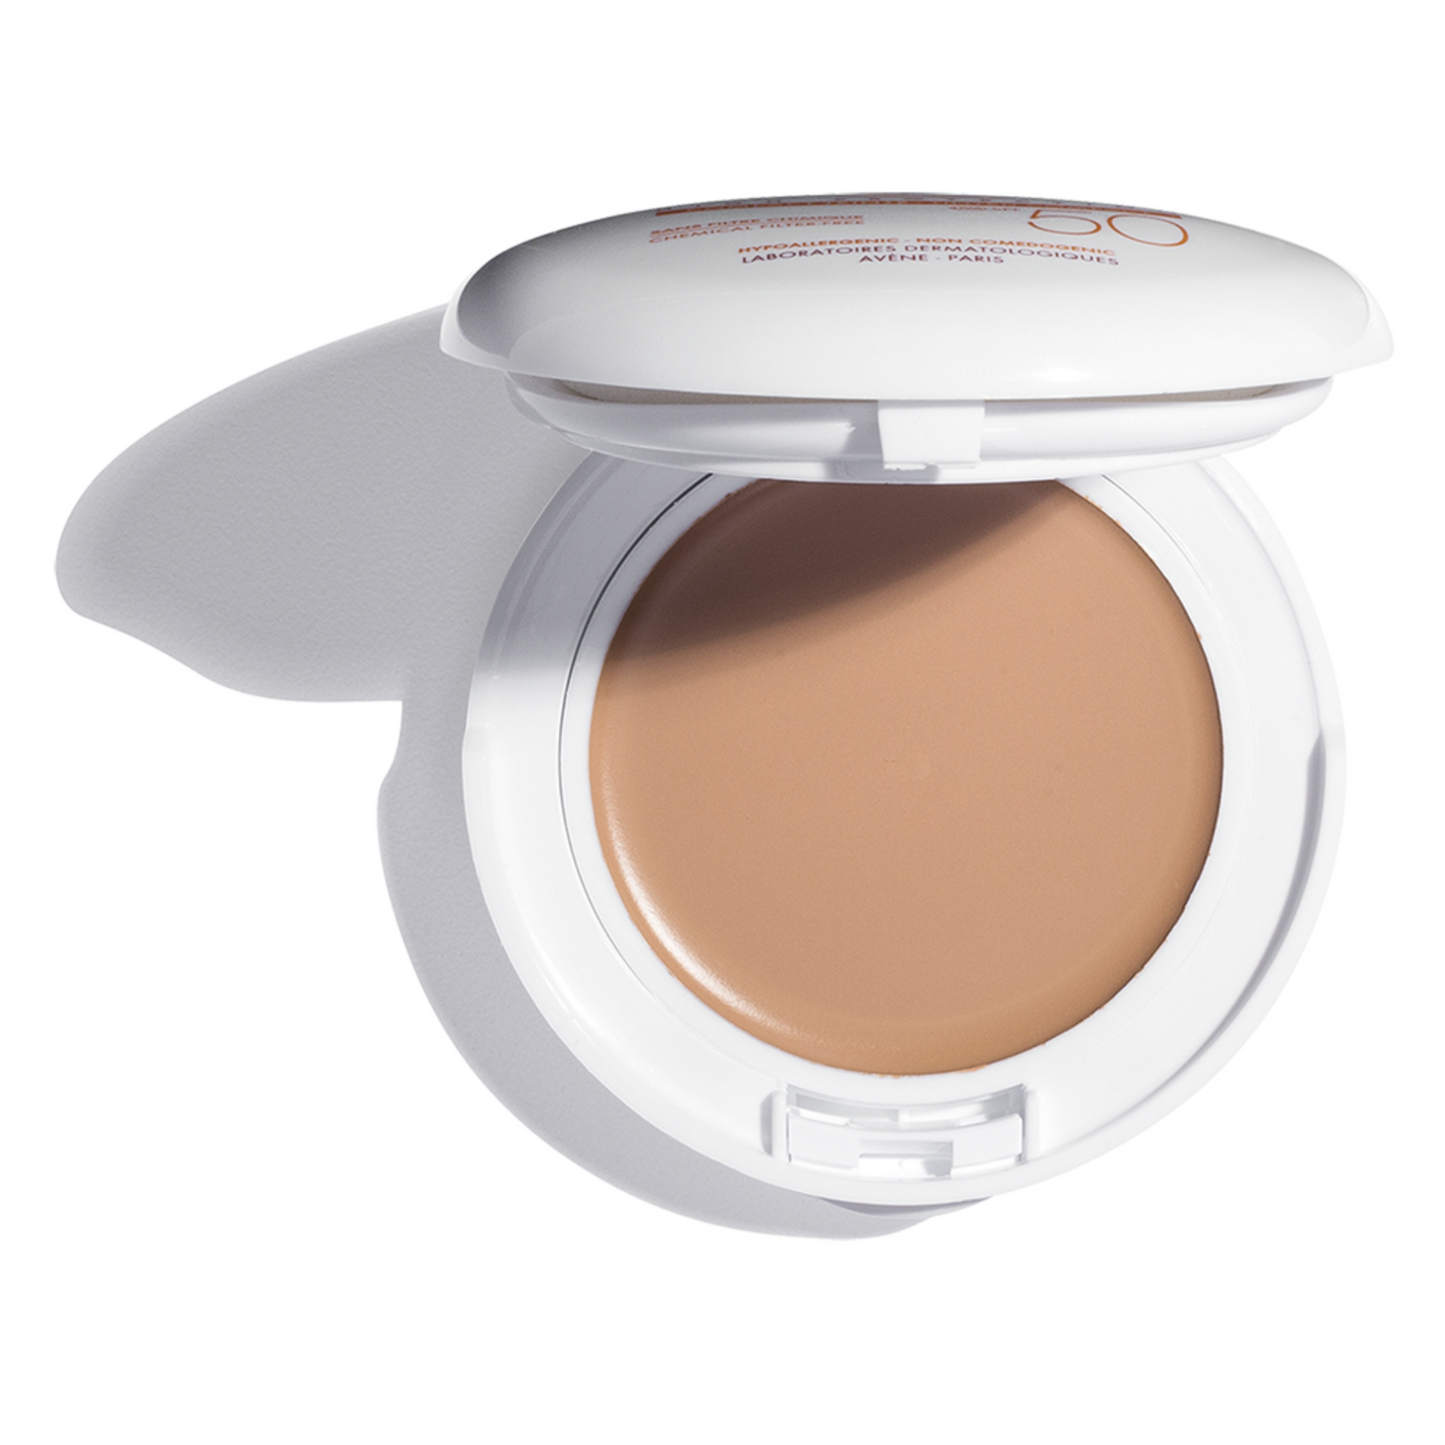 Primary image of  Mineral High Protection Tinted Compact SPF 50 - Beige Open Compact